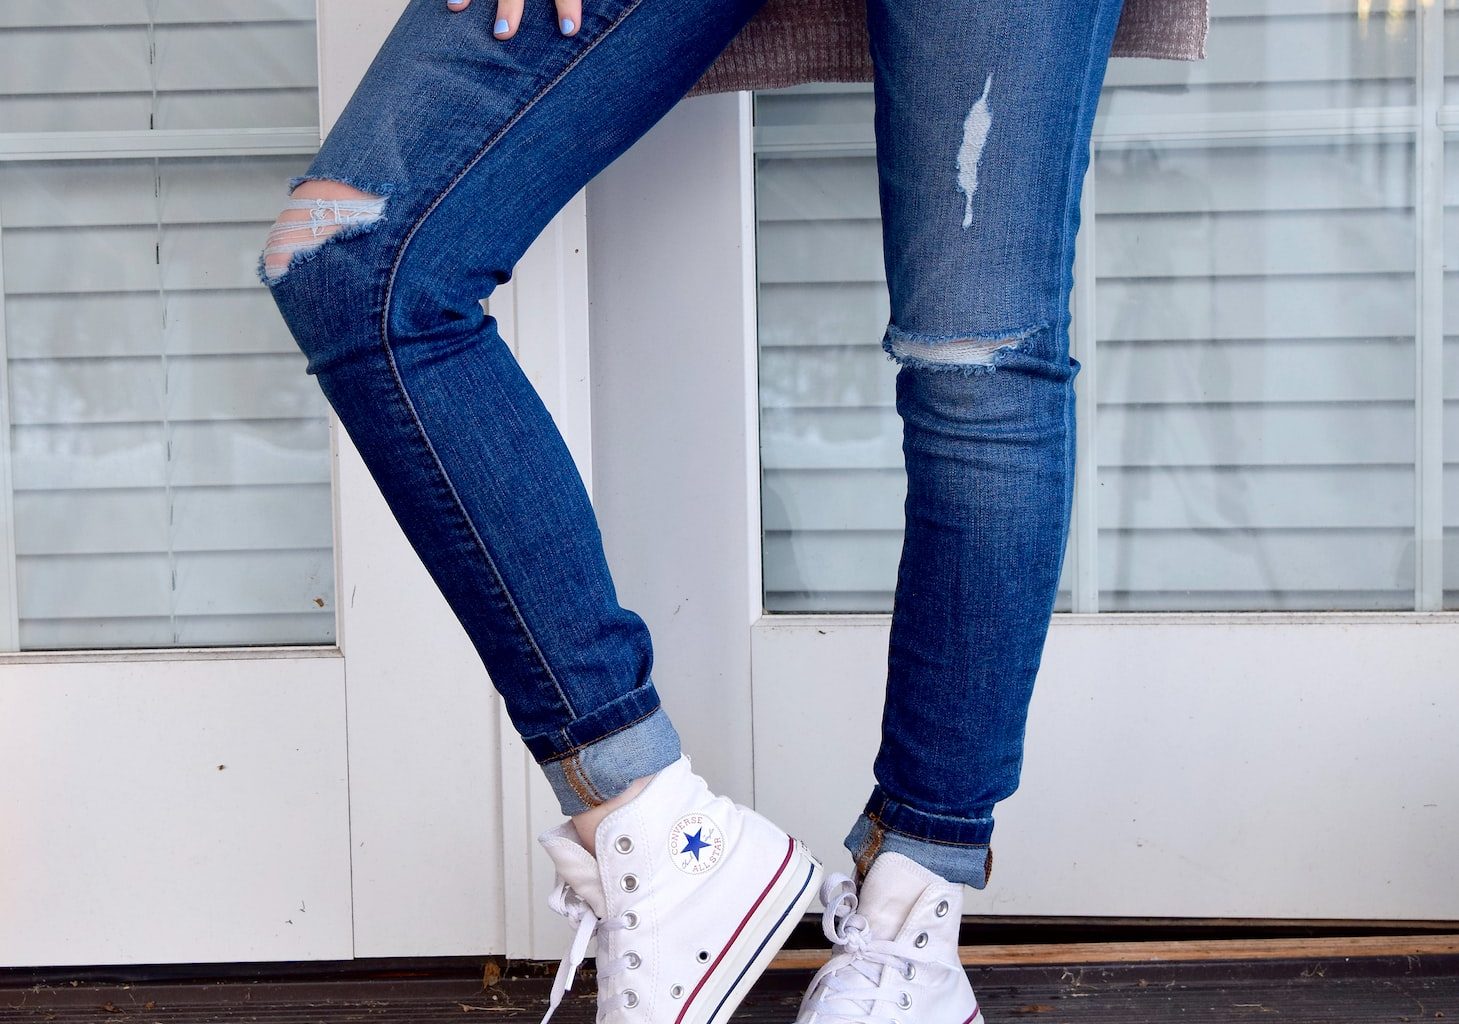 women's distressed blue denim jeans and pair of white Converse Allstar high-tops